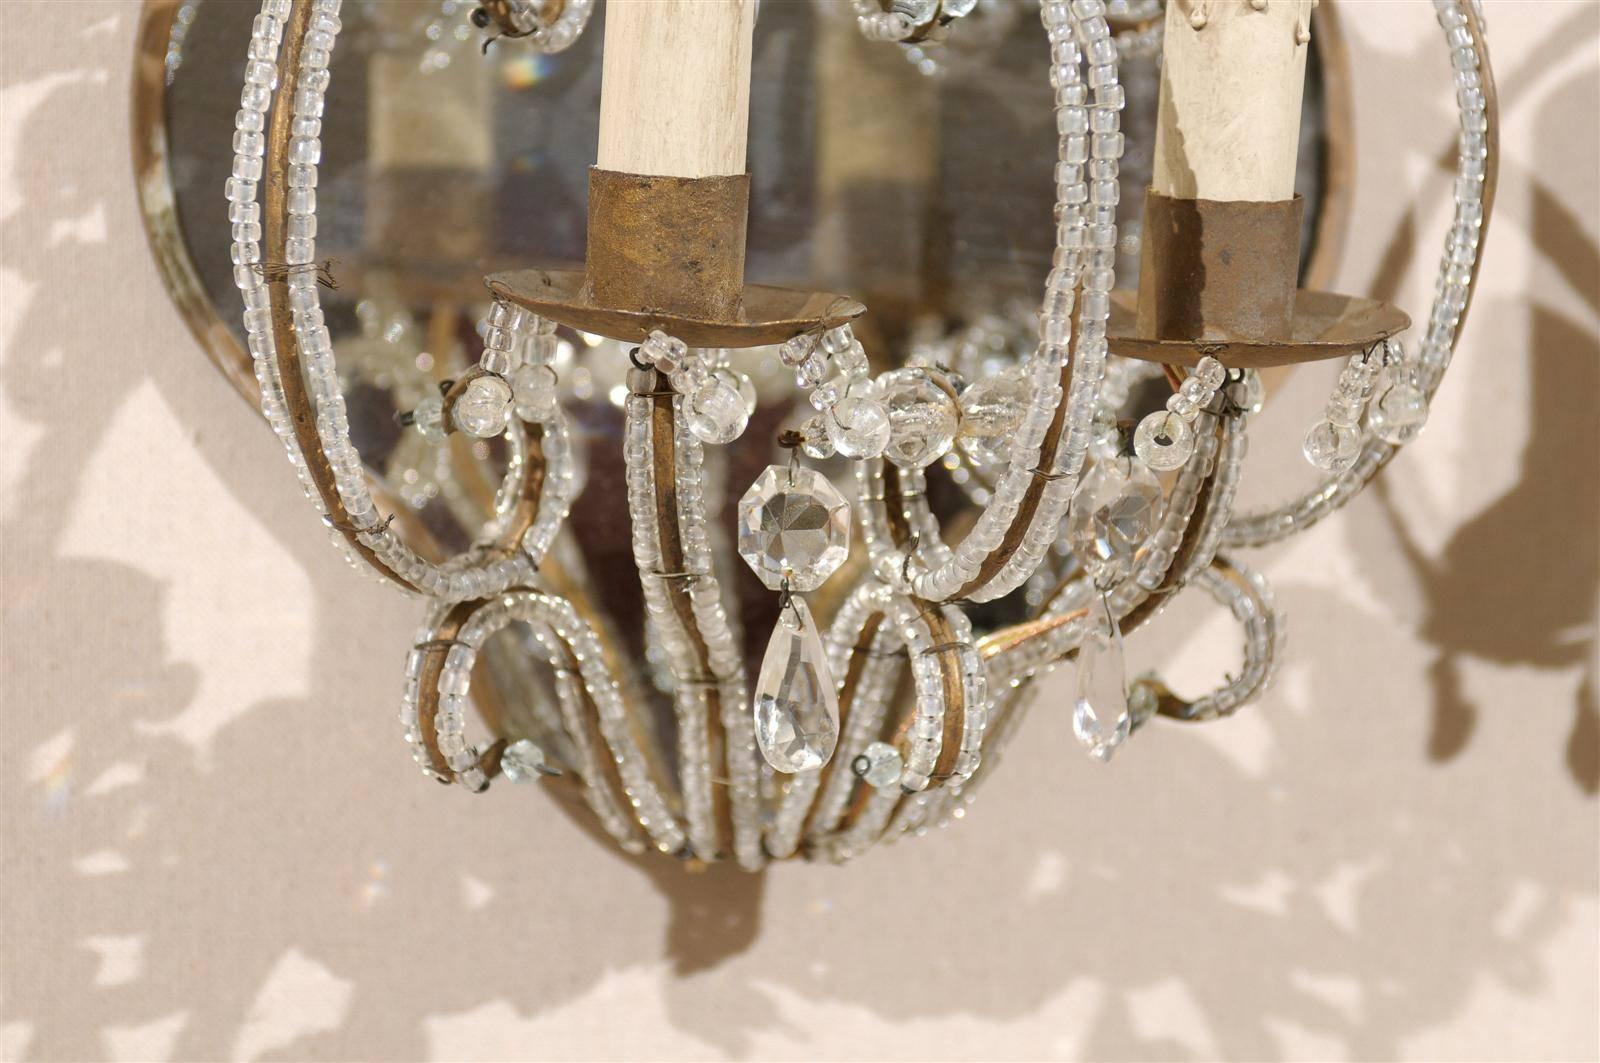 Pair of Italian Mirrored Sconces with Elegant Beaded Armature and Scrolls 4